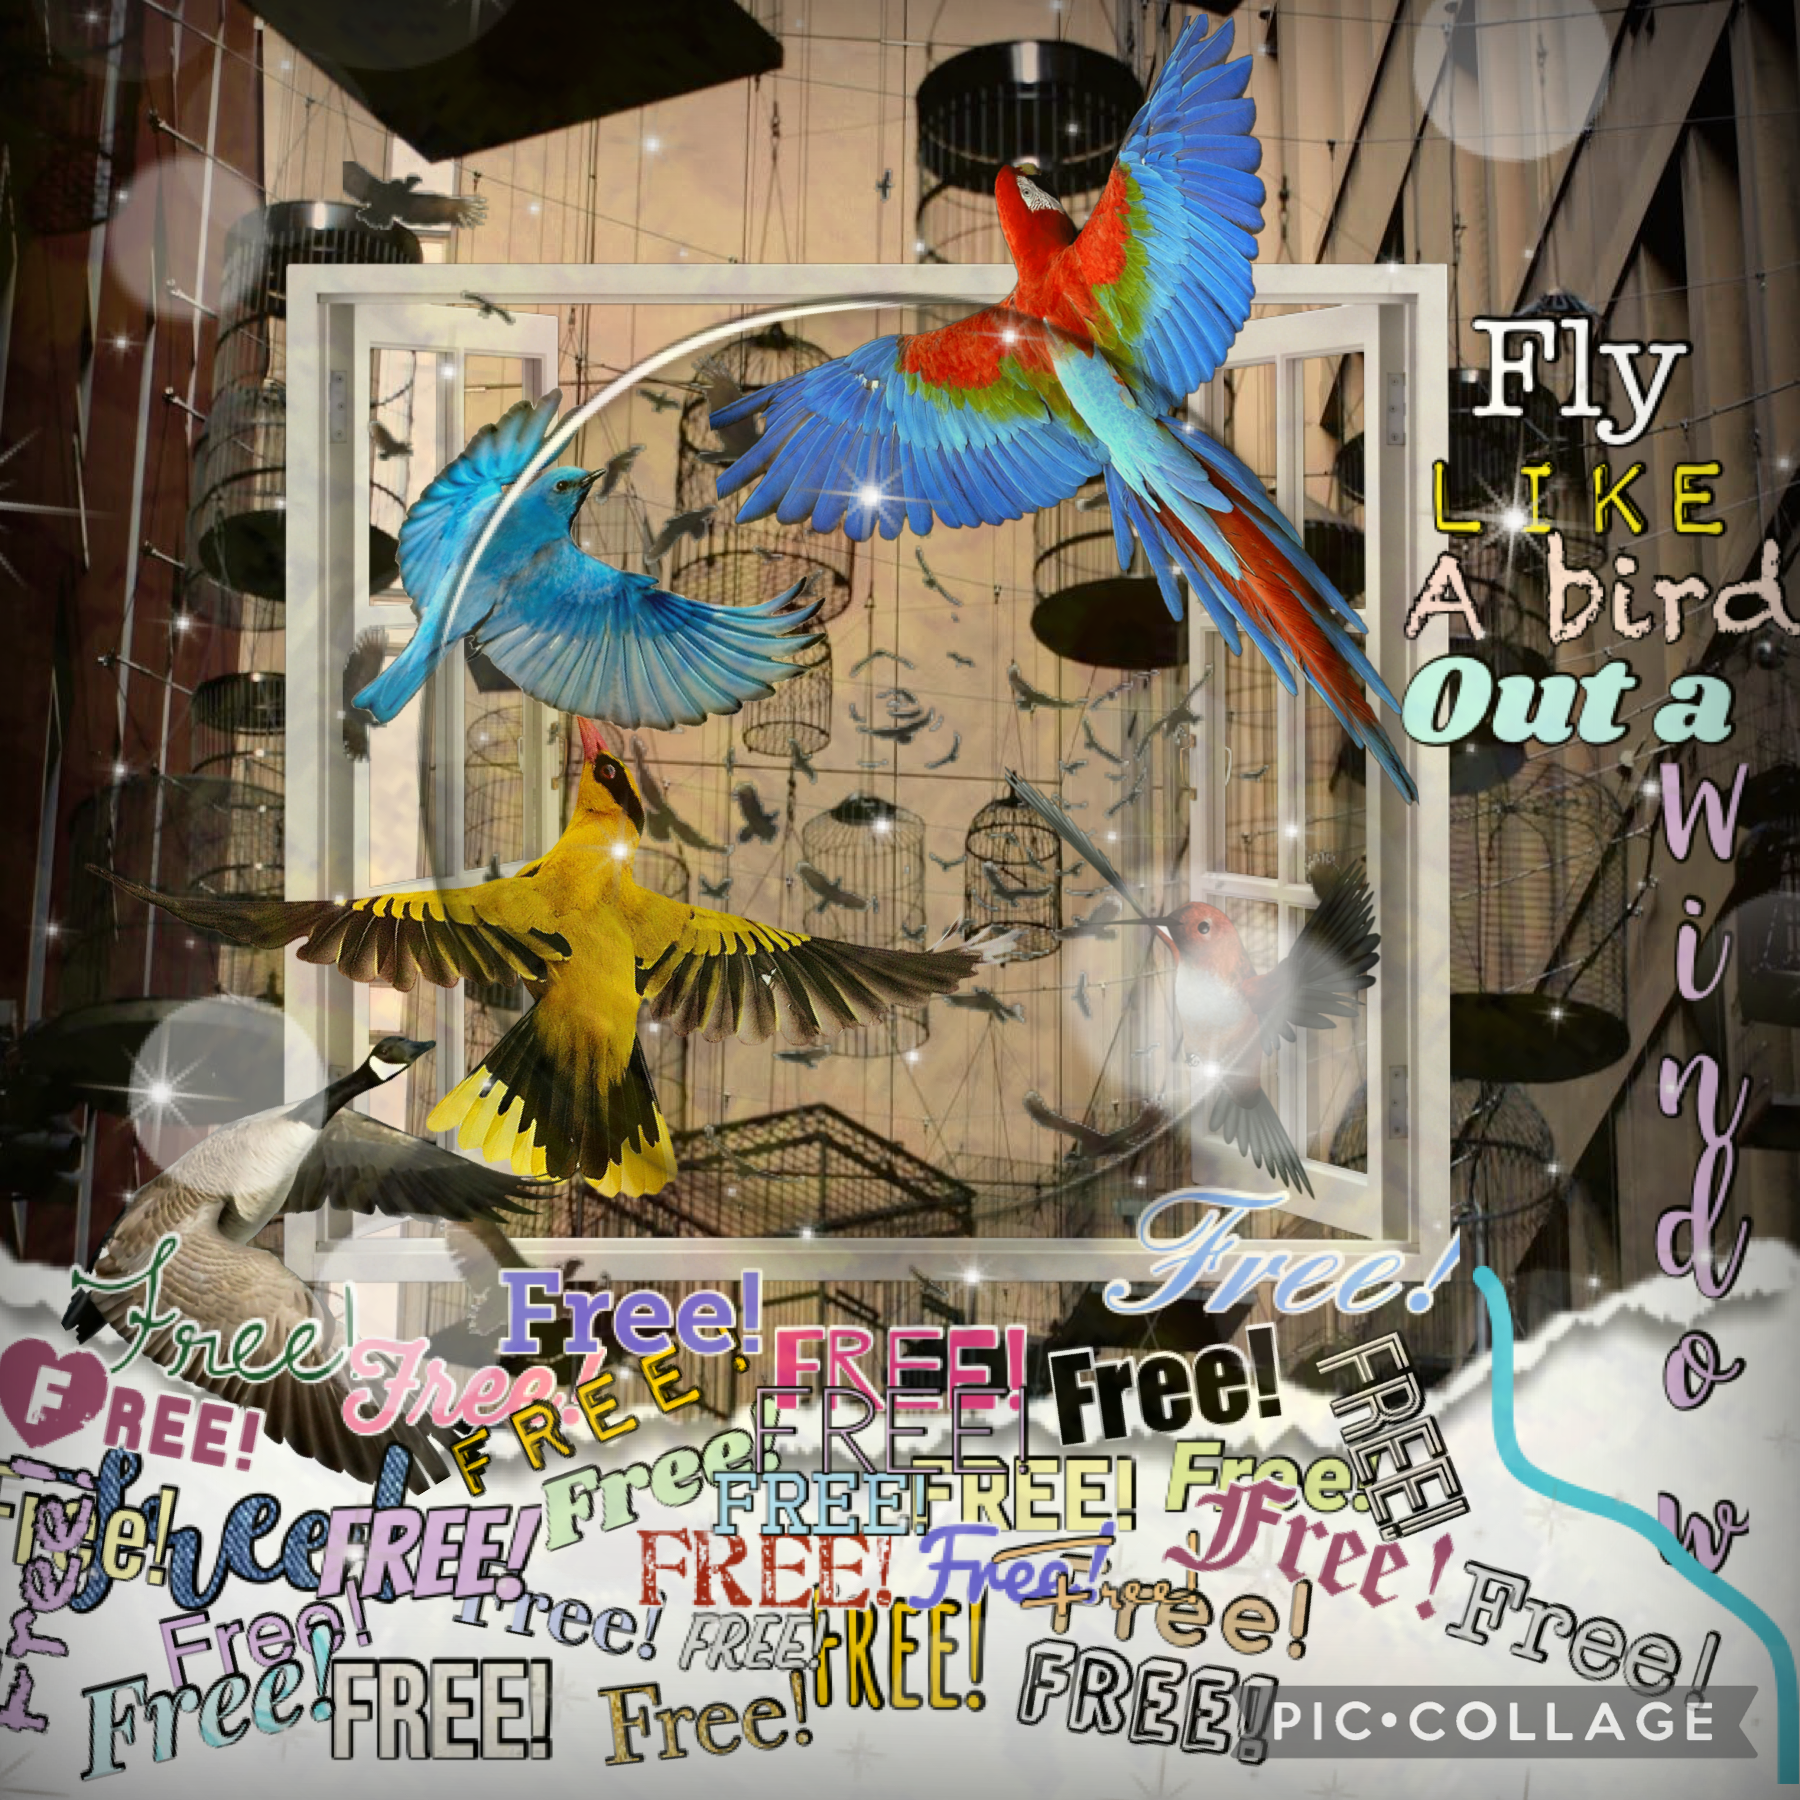 TAP
Yyyyyeeeeeessssss!!!
I’m real proud of this collage, took forever to do all the text of “Free!”   
@ the bottom. Fly like a bird out a window. Please rate this, 1-10! Qotd- what is your dream pet bird? 
Aotd- Cockatiel!